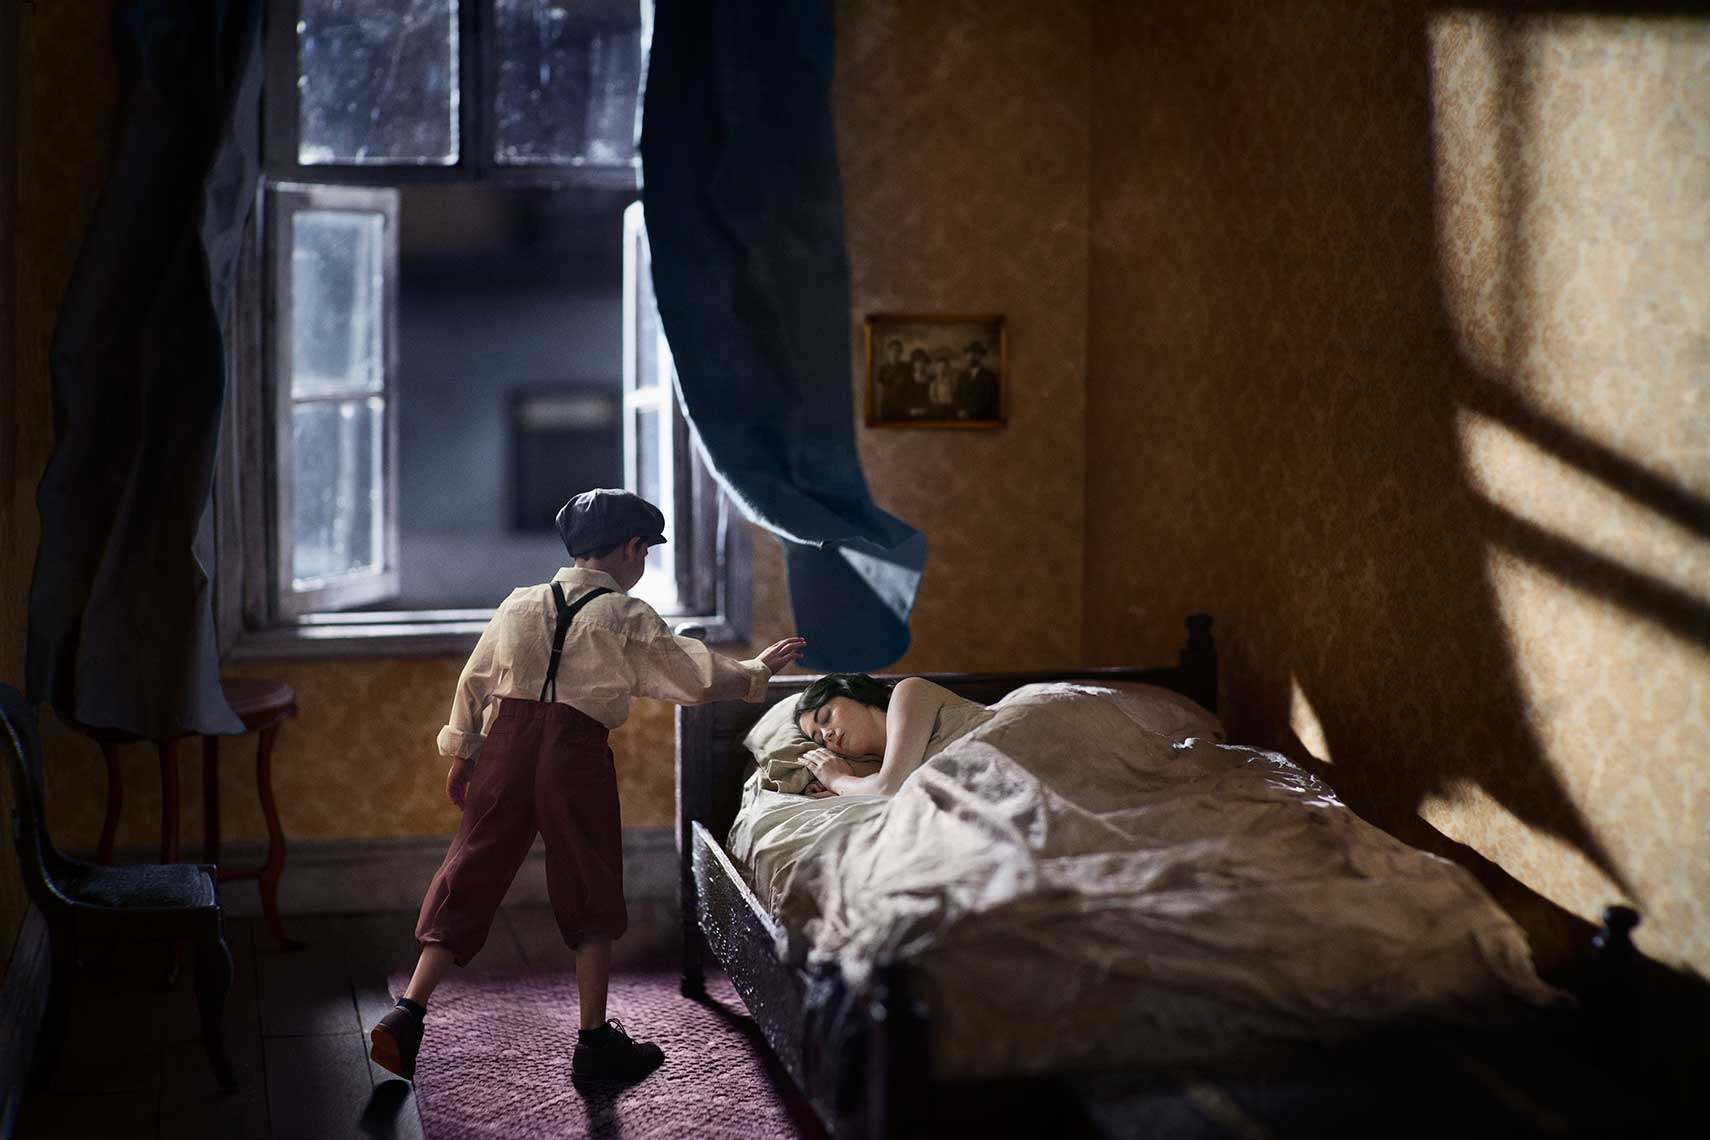 Dramatic painterly photomontage of a 1930s’ European bedroom at night, a young boy in period garb approaches the sleeping woman in bed, the curtain blowing in the breeze from the open window.